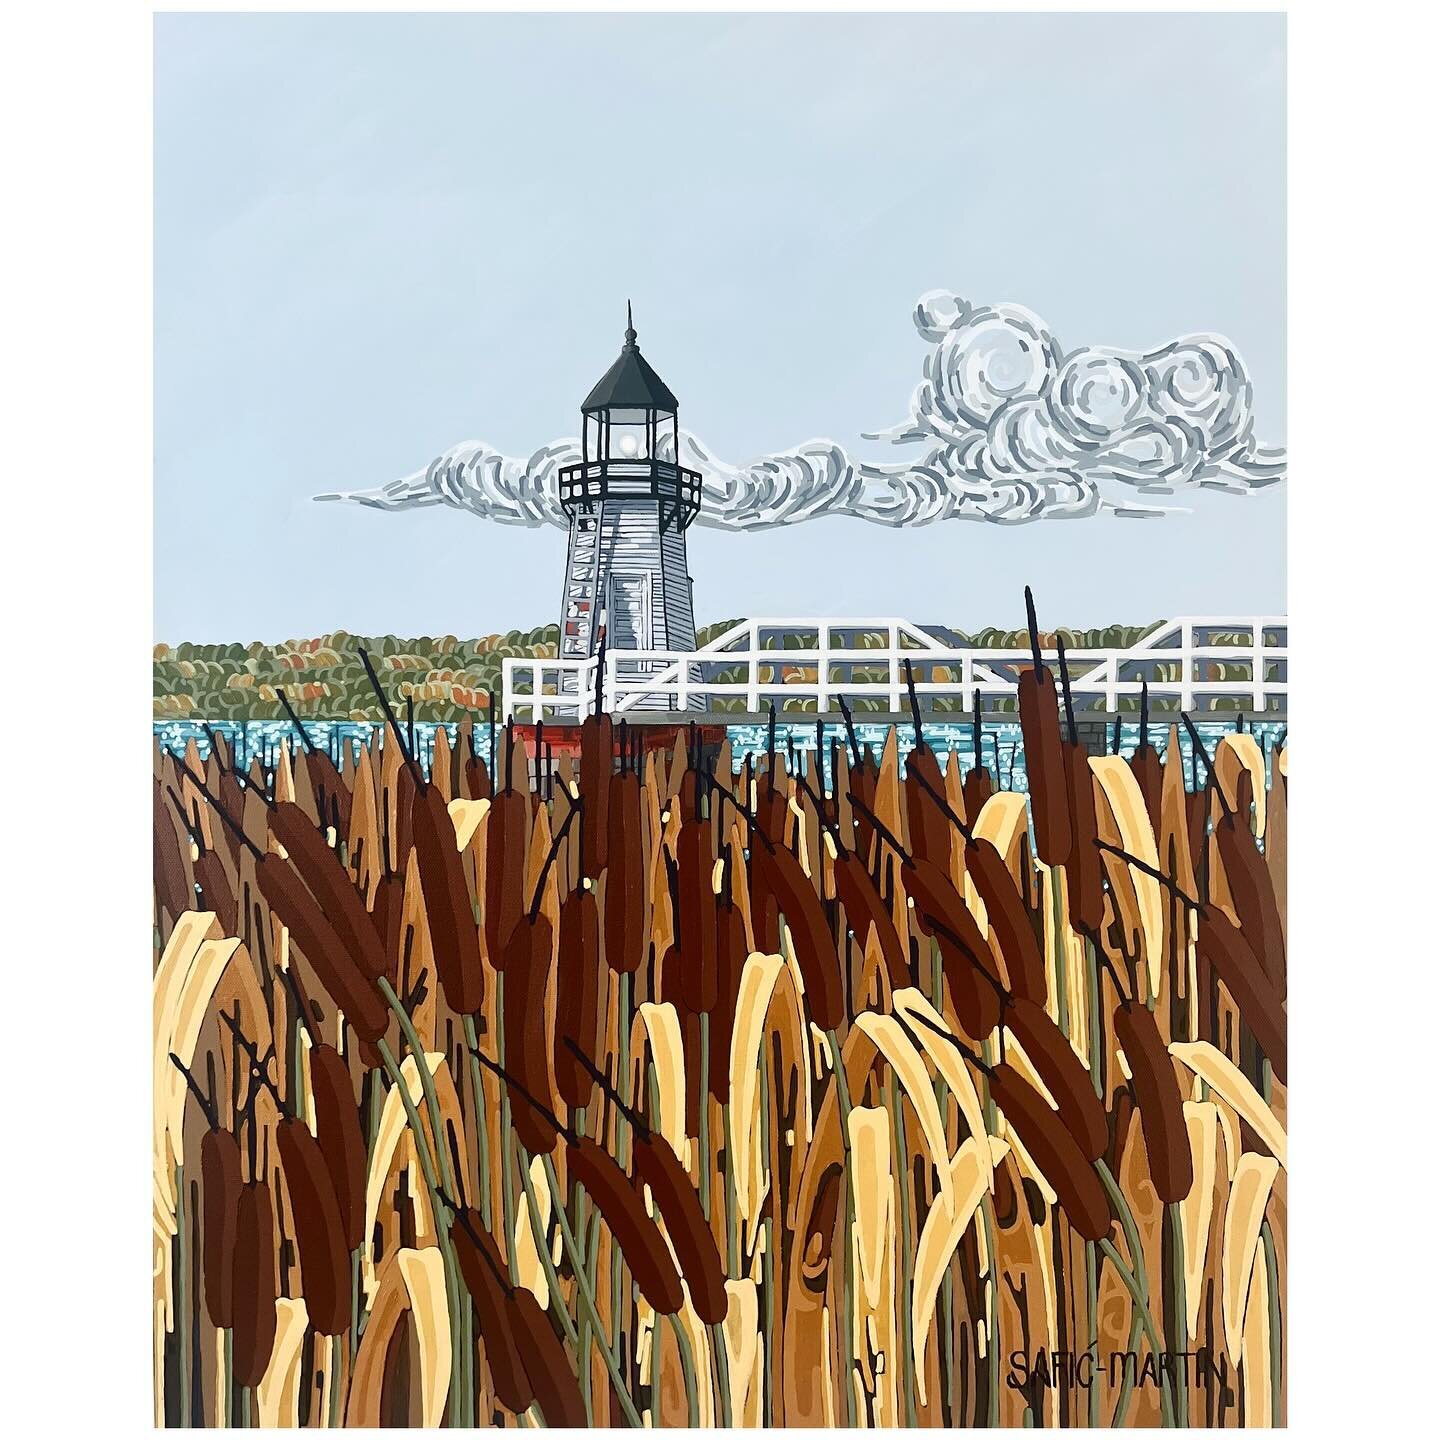 The Wind in the Reeds.
Doubling Point Lighthouse, Maine.
Acrylic on 24x30x1.5in canvas. $475

#tiarasaficmartinart #acryliconcanvas🎨 #lighthouse #doublingpointlighthouse #doublingpointlight #bathironworks #artofinstagram #newenglandart #maine #maine